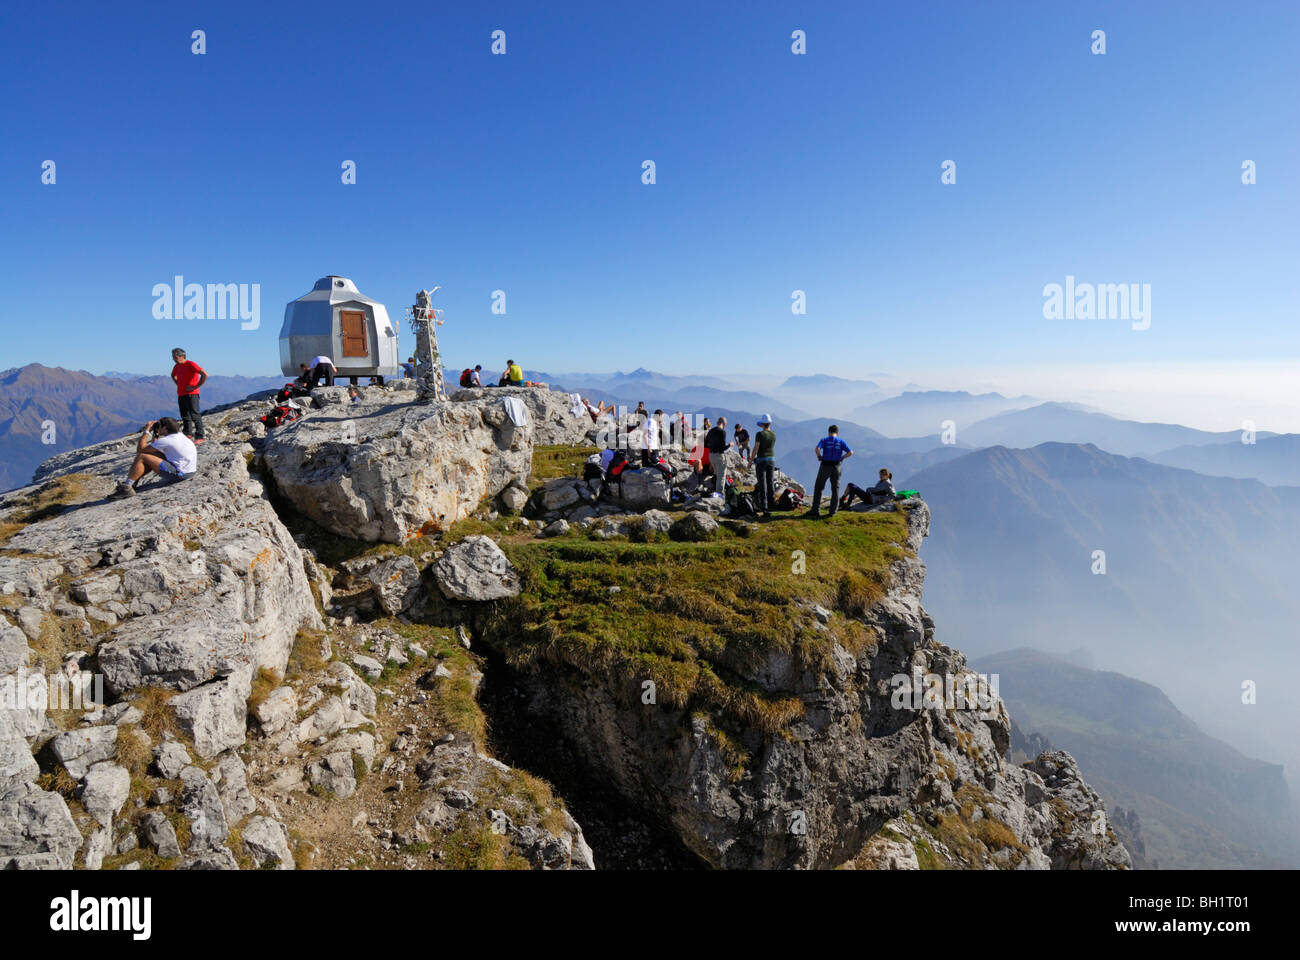 Group of hikers on summit of Grigne, Bergamo Alps, Como, Lombardy, Italy Stock Photo